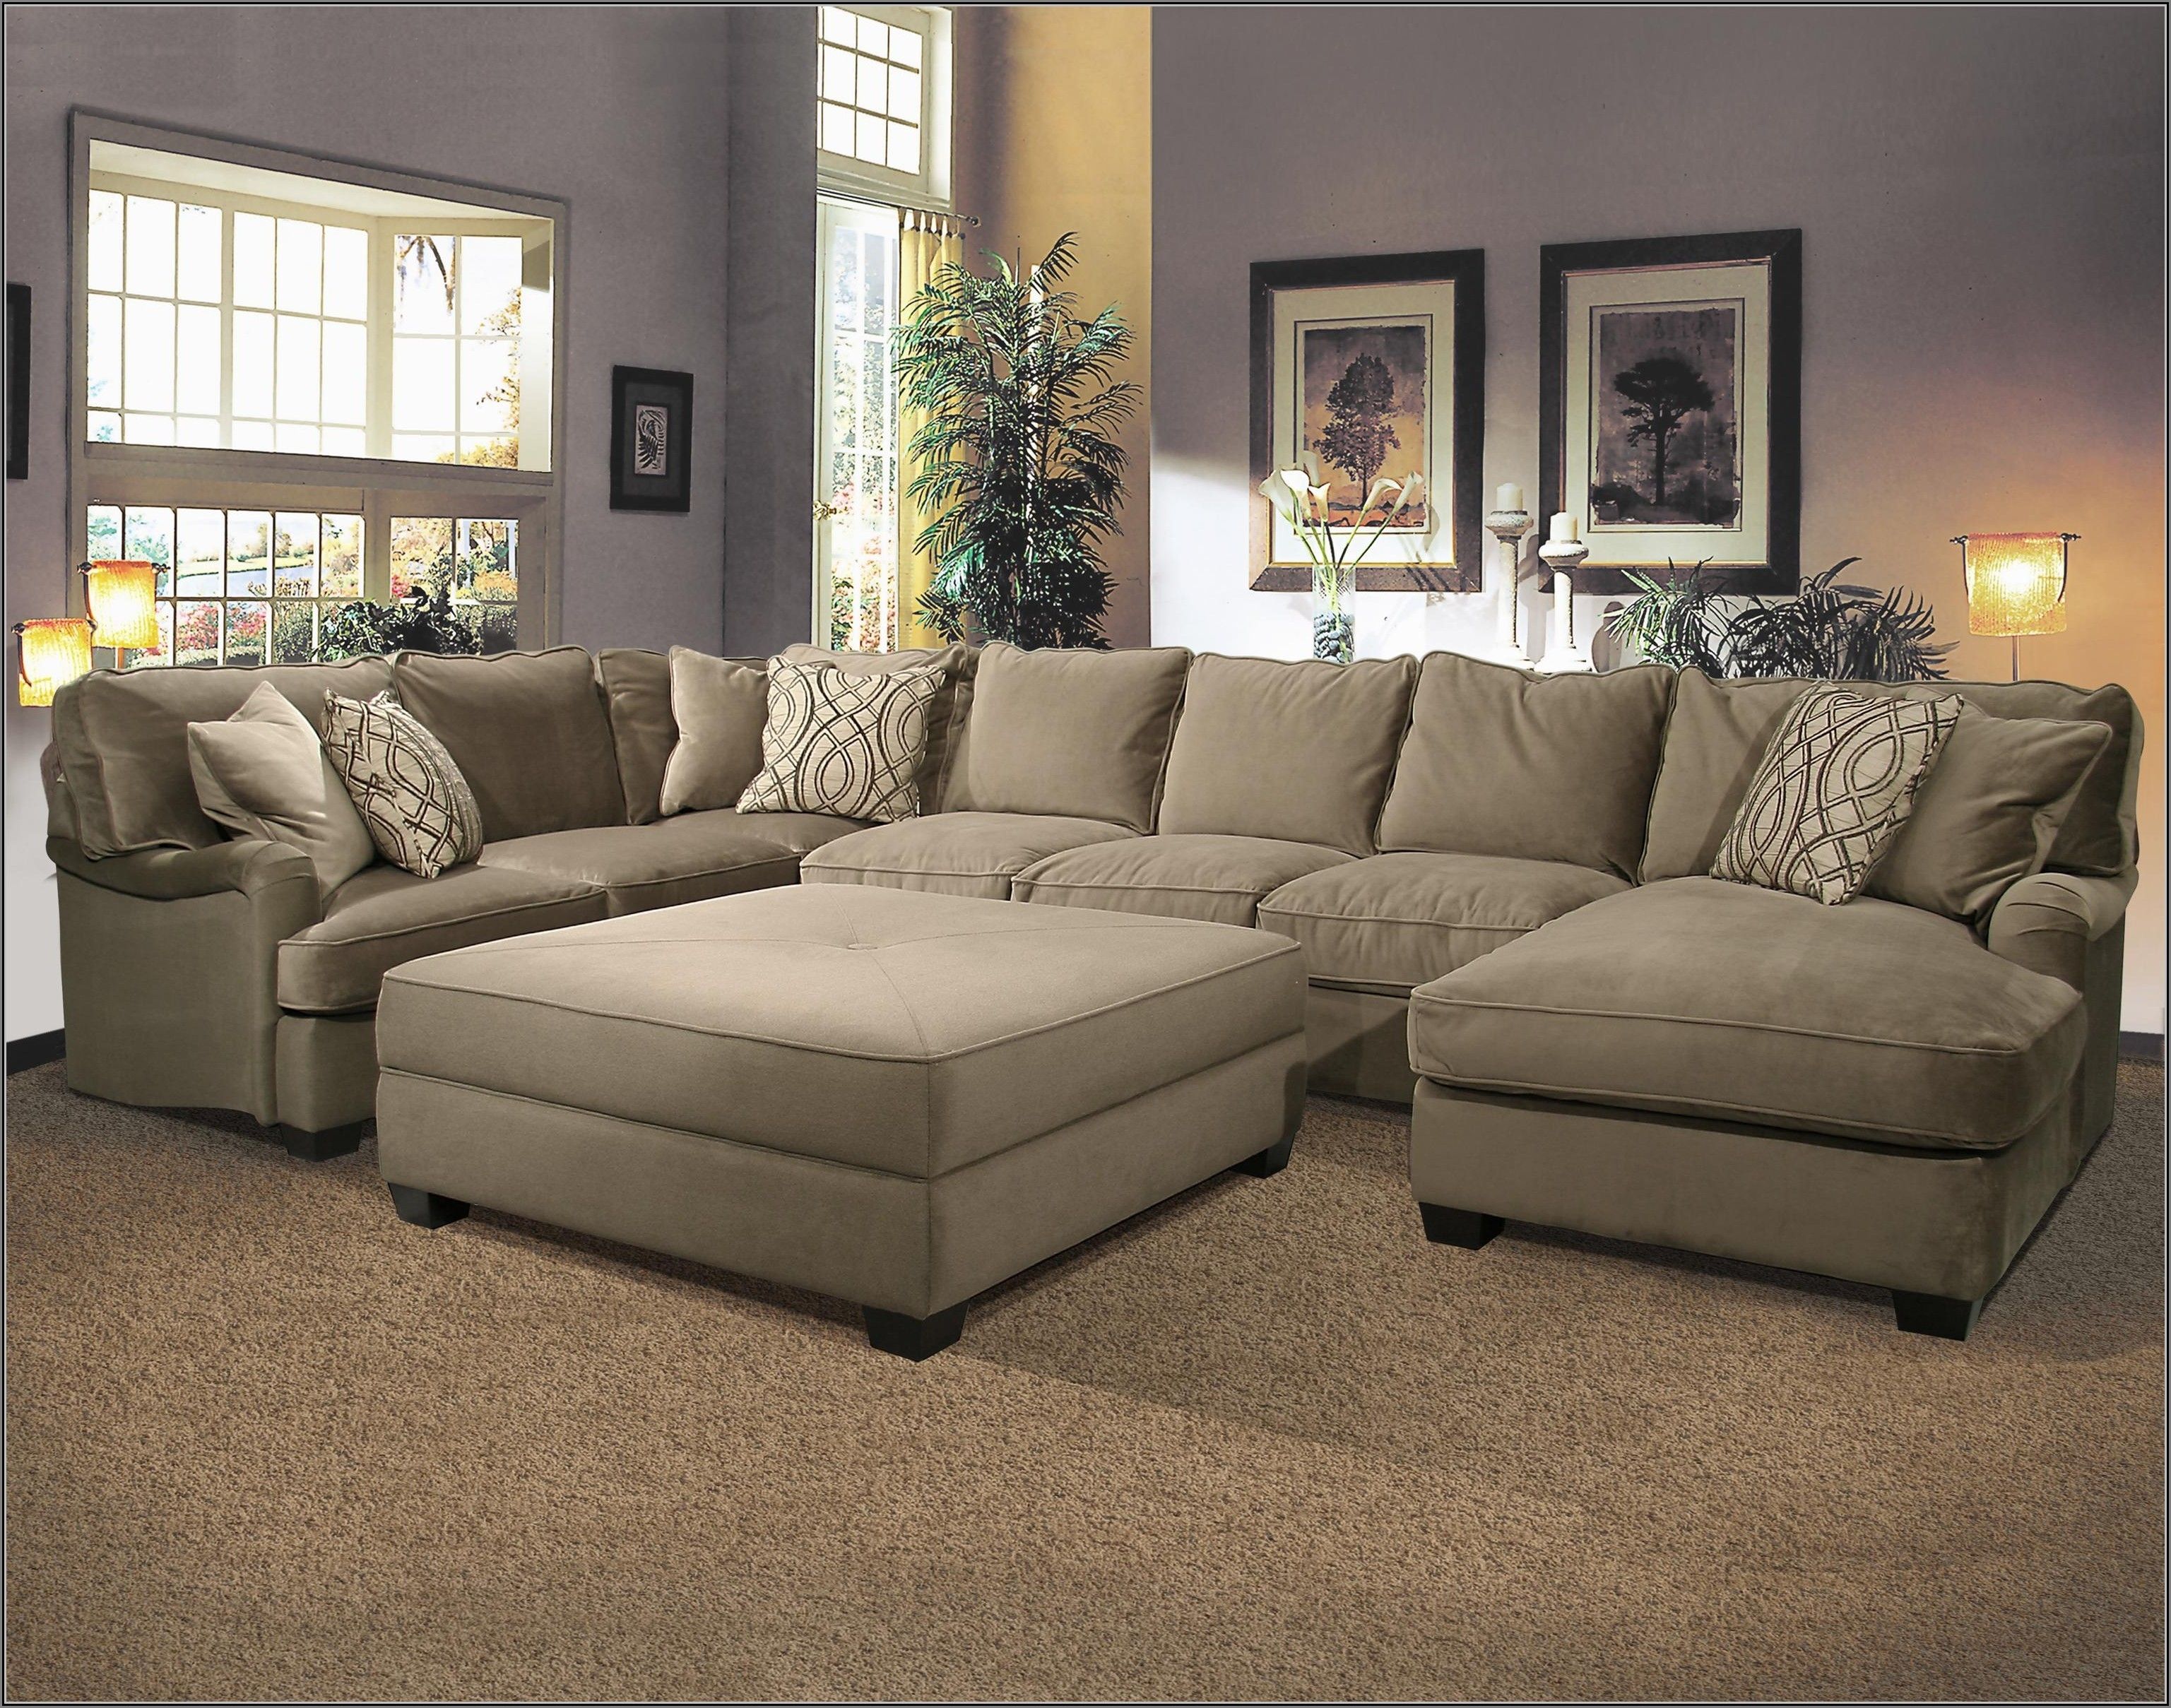 Sectional Sofa With Large Ottoman Hotelsbacau Com Intended For With Sofas With Ottoman (Photo 9 of 10)